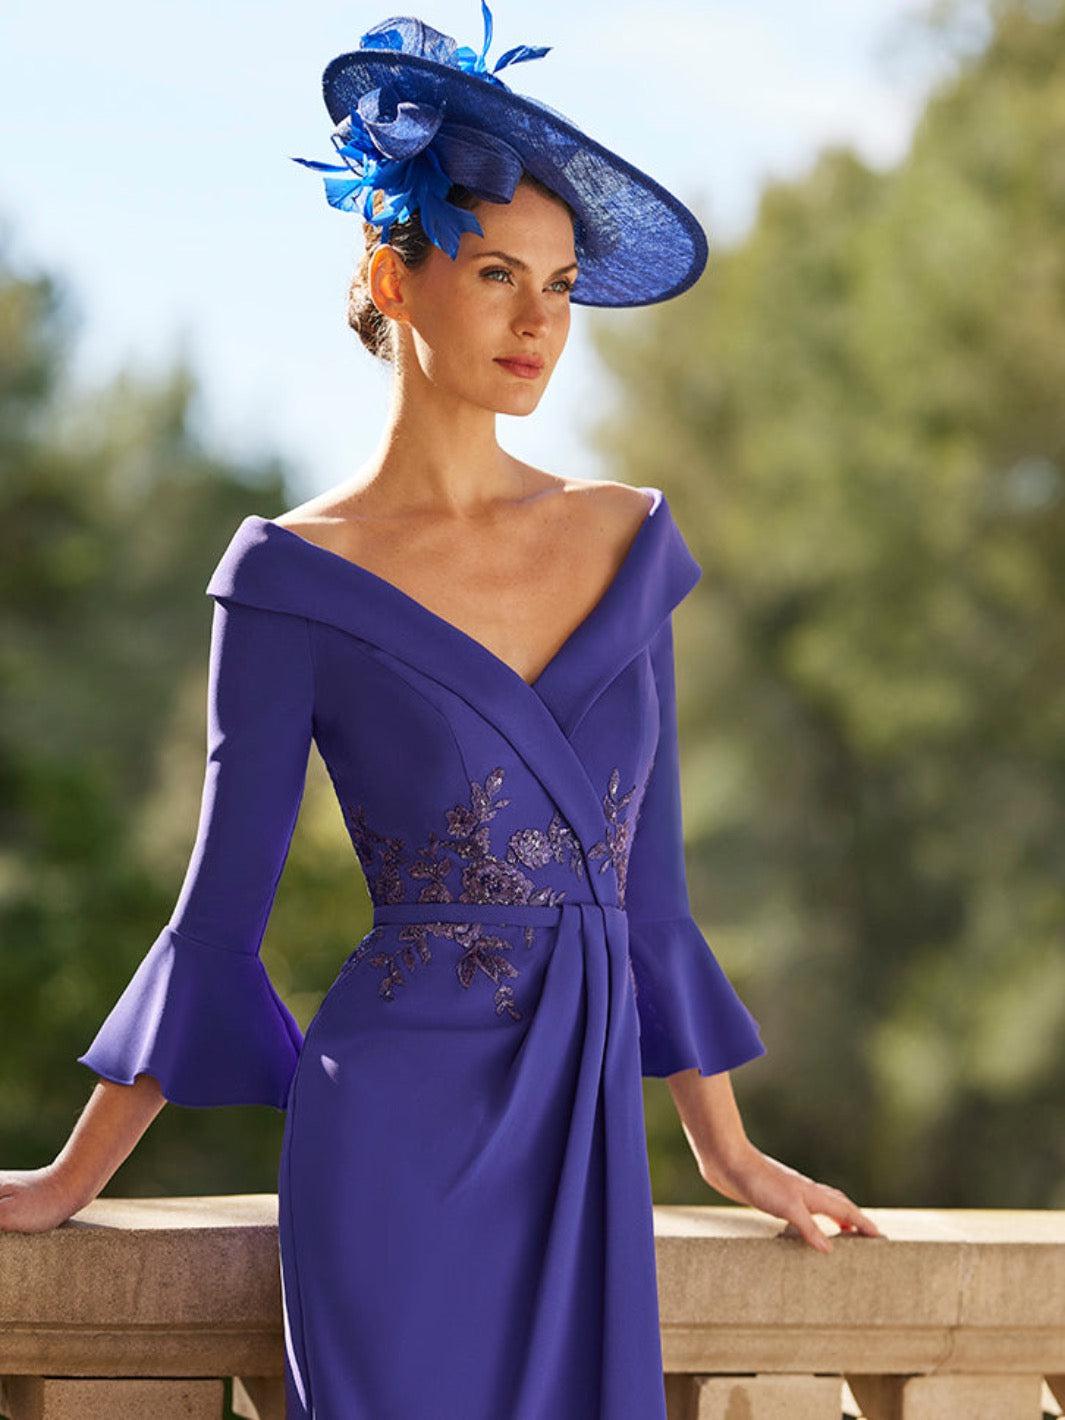 Couture Club Dress 8G159 In Violet-Mother of the bride- mother of the groom -Nicola Ross